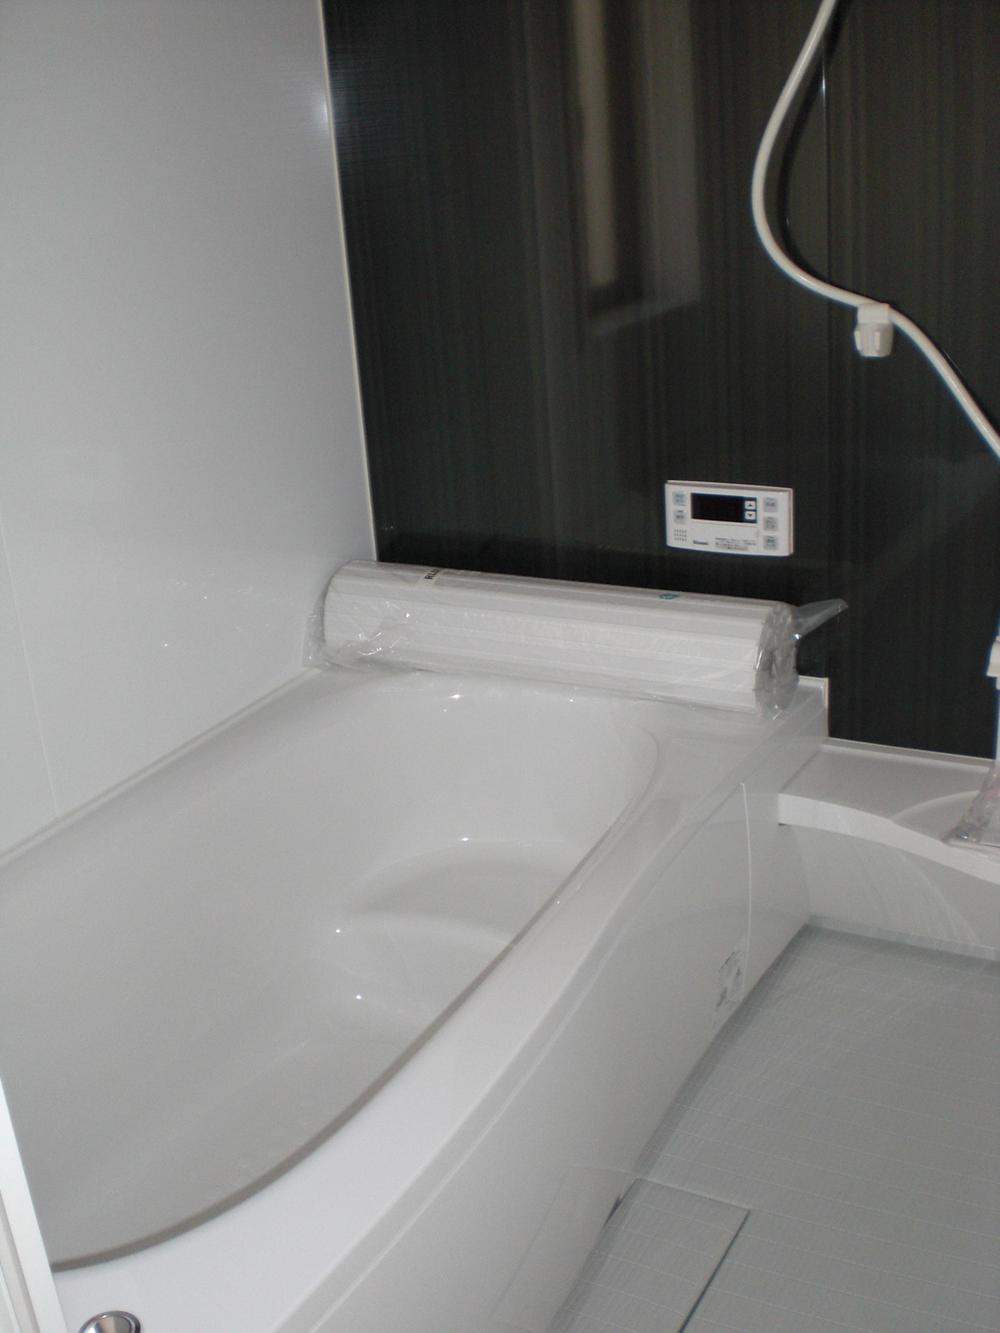 Same specifications photo (bathroom). It is the same specification properties